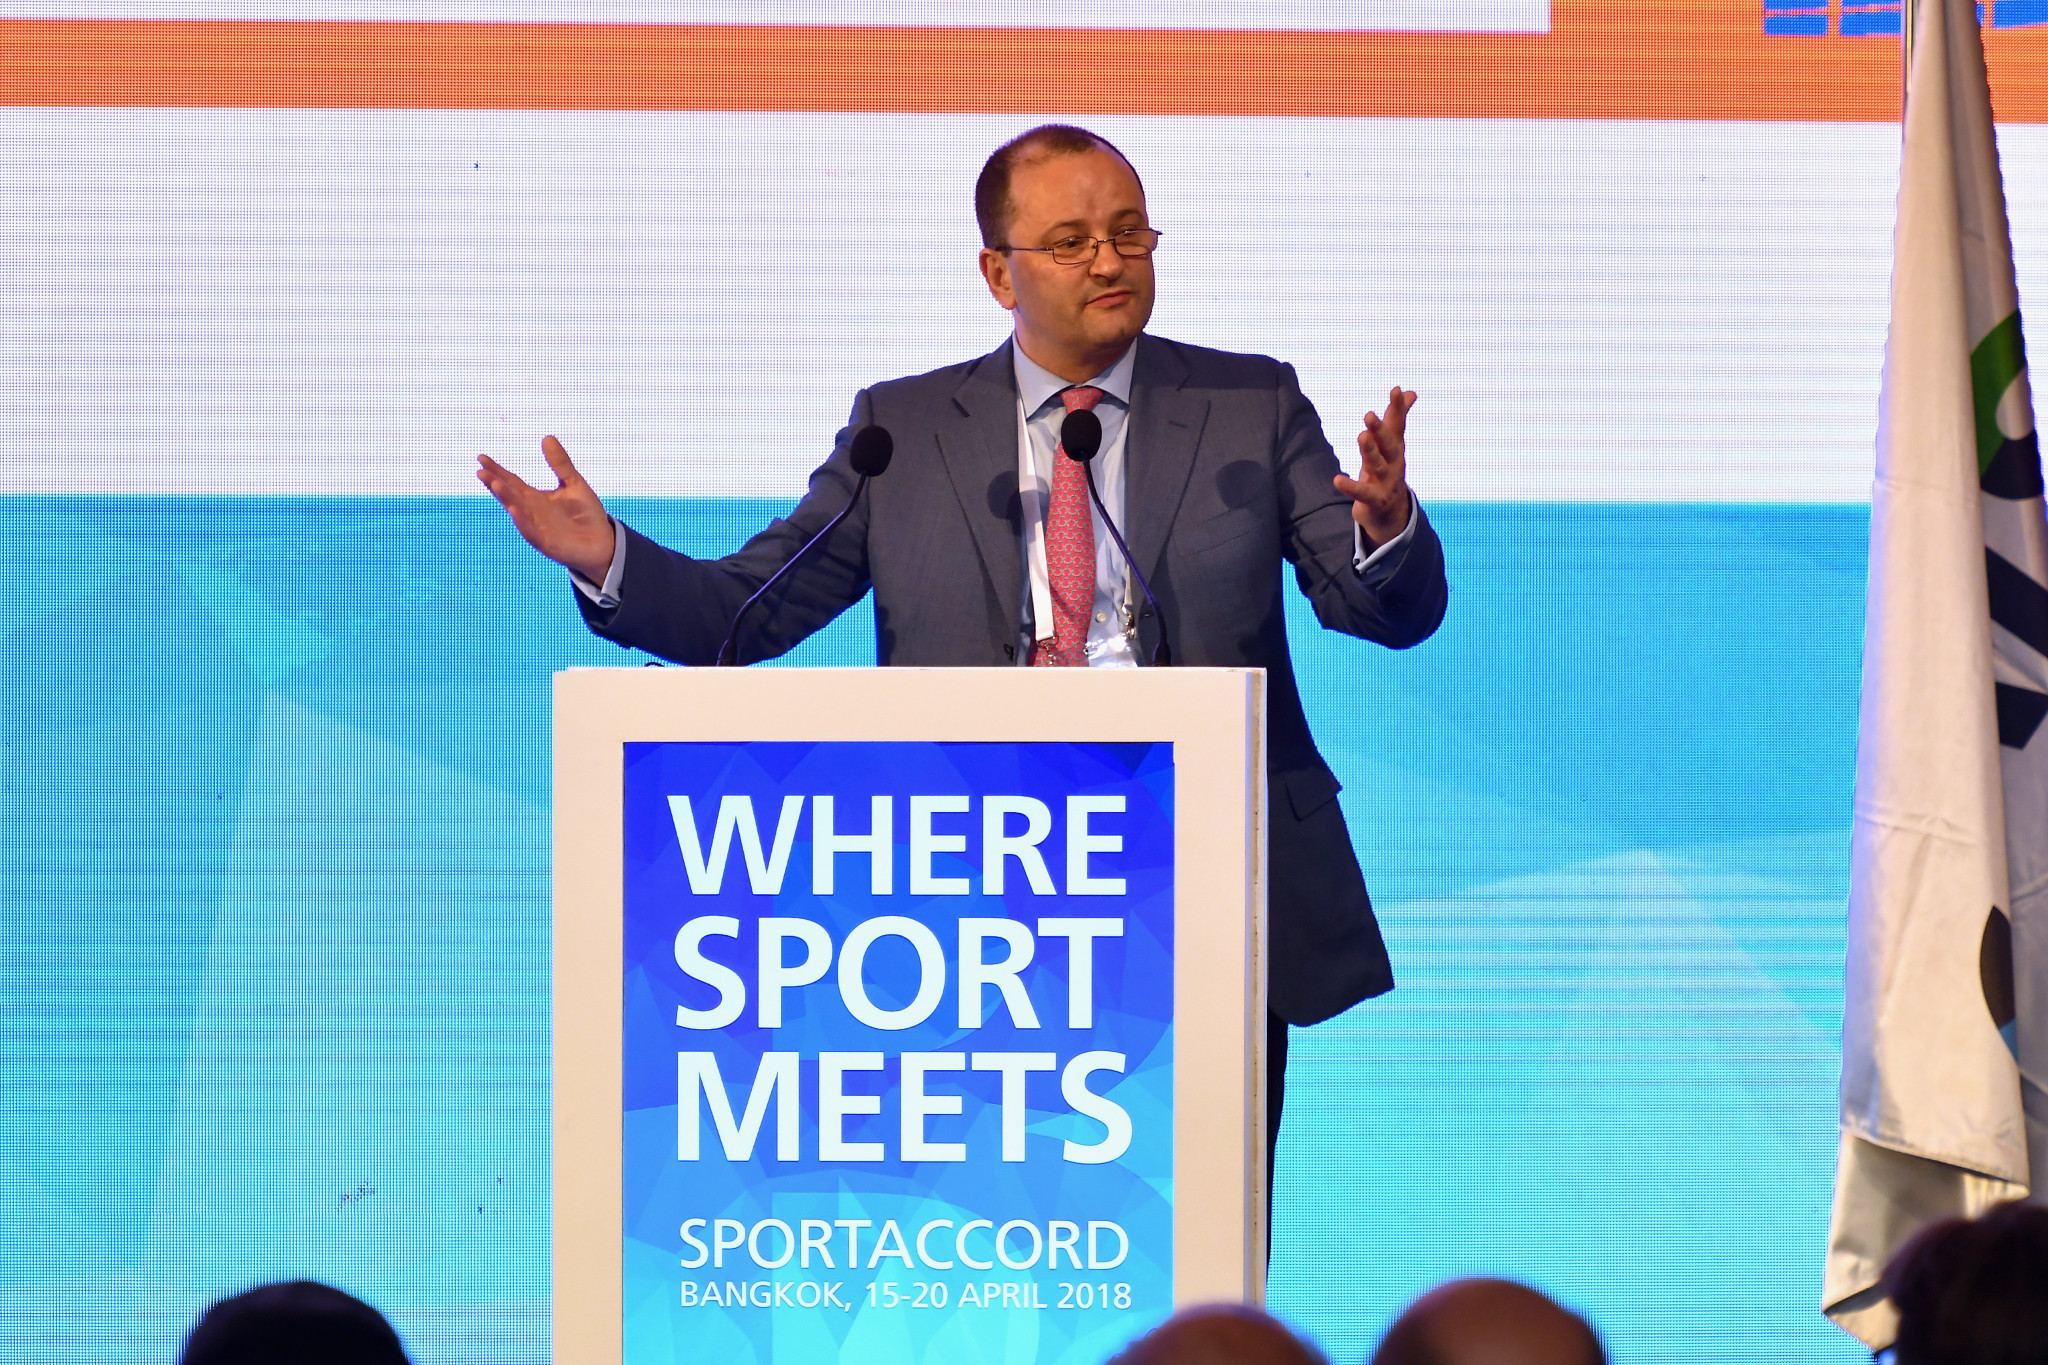 President Patrick Baumann led the Global Association of International Sports Federations' (GAISF) General Assembly on the final day of SportAccord Summit in Bangkok ©SportAccord/Flickr